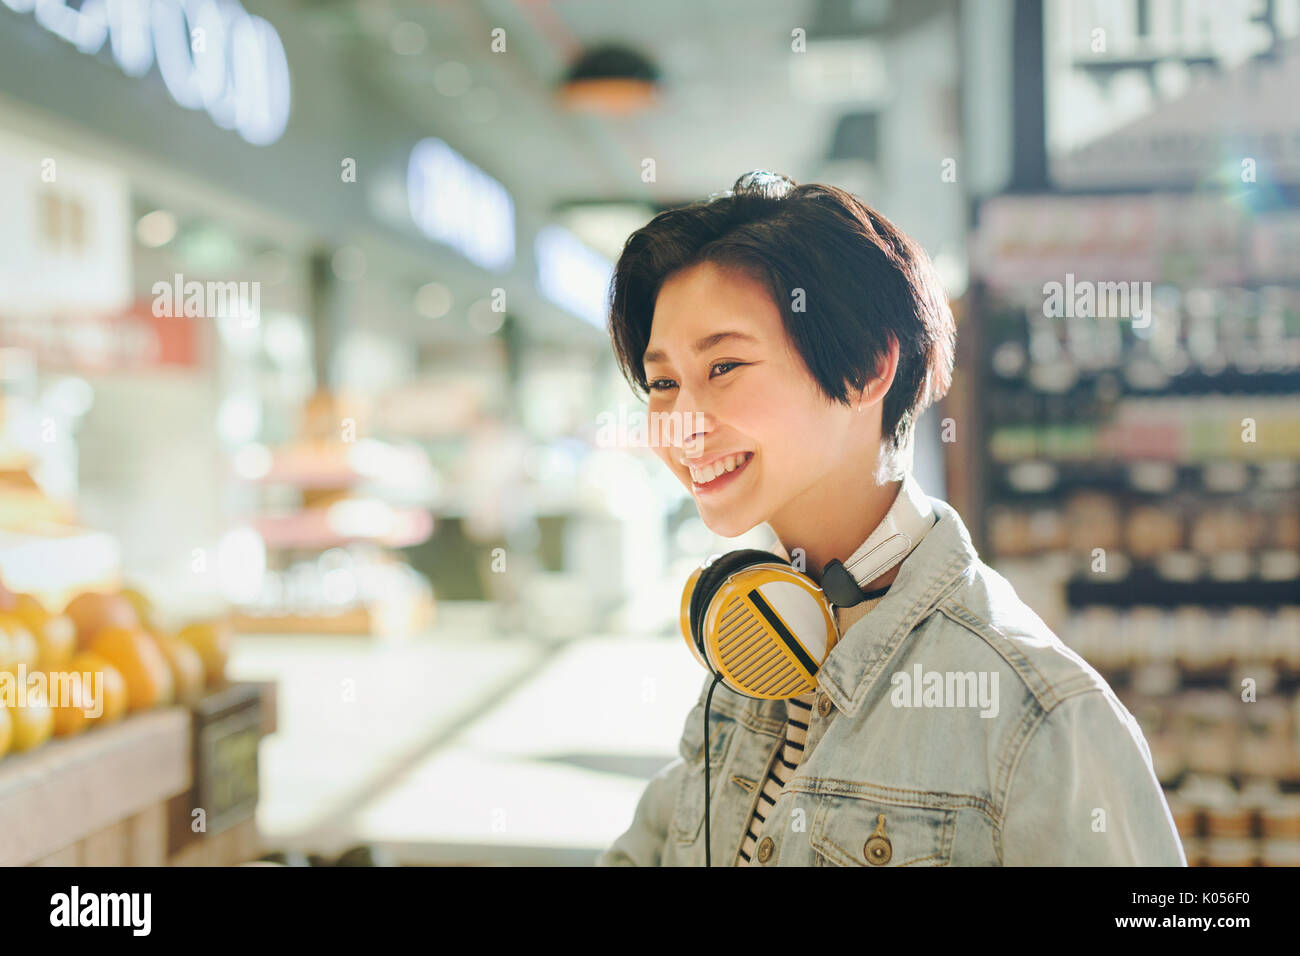 Smiling young woman with headphones grocery shopping in market Stock Photo